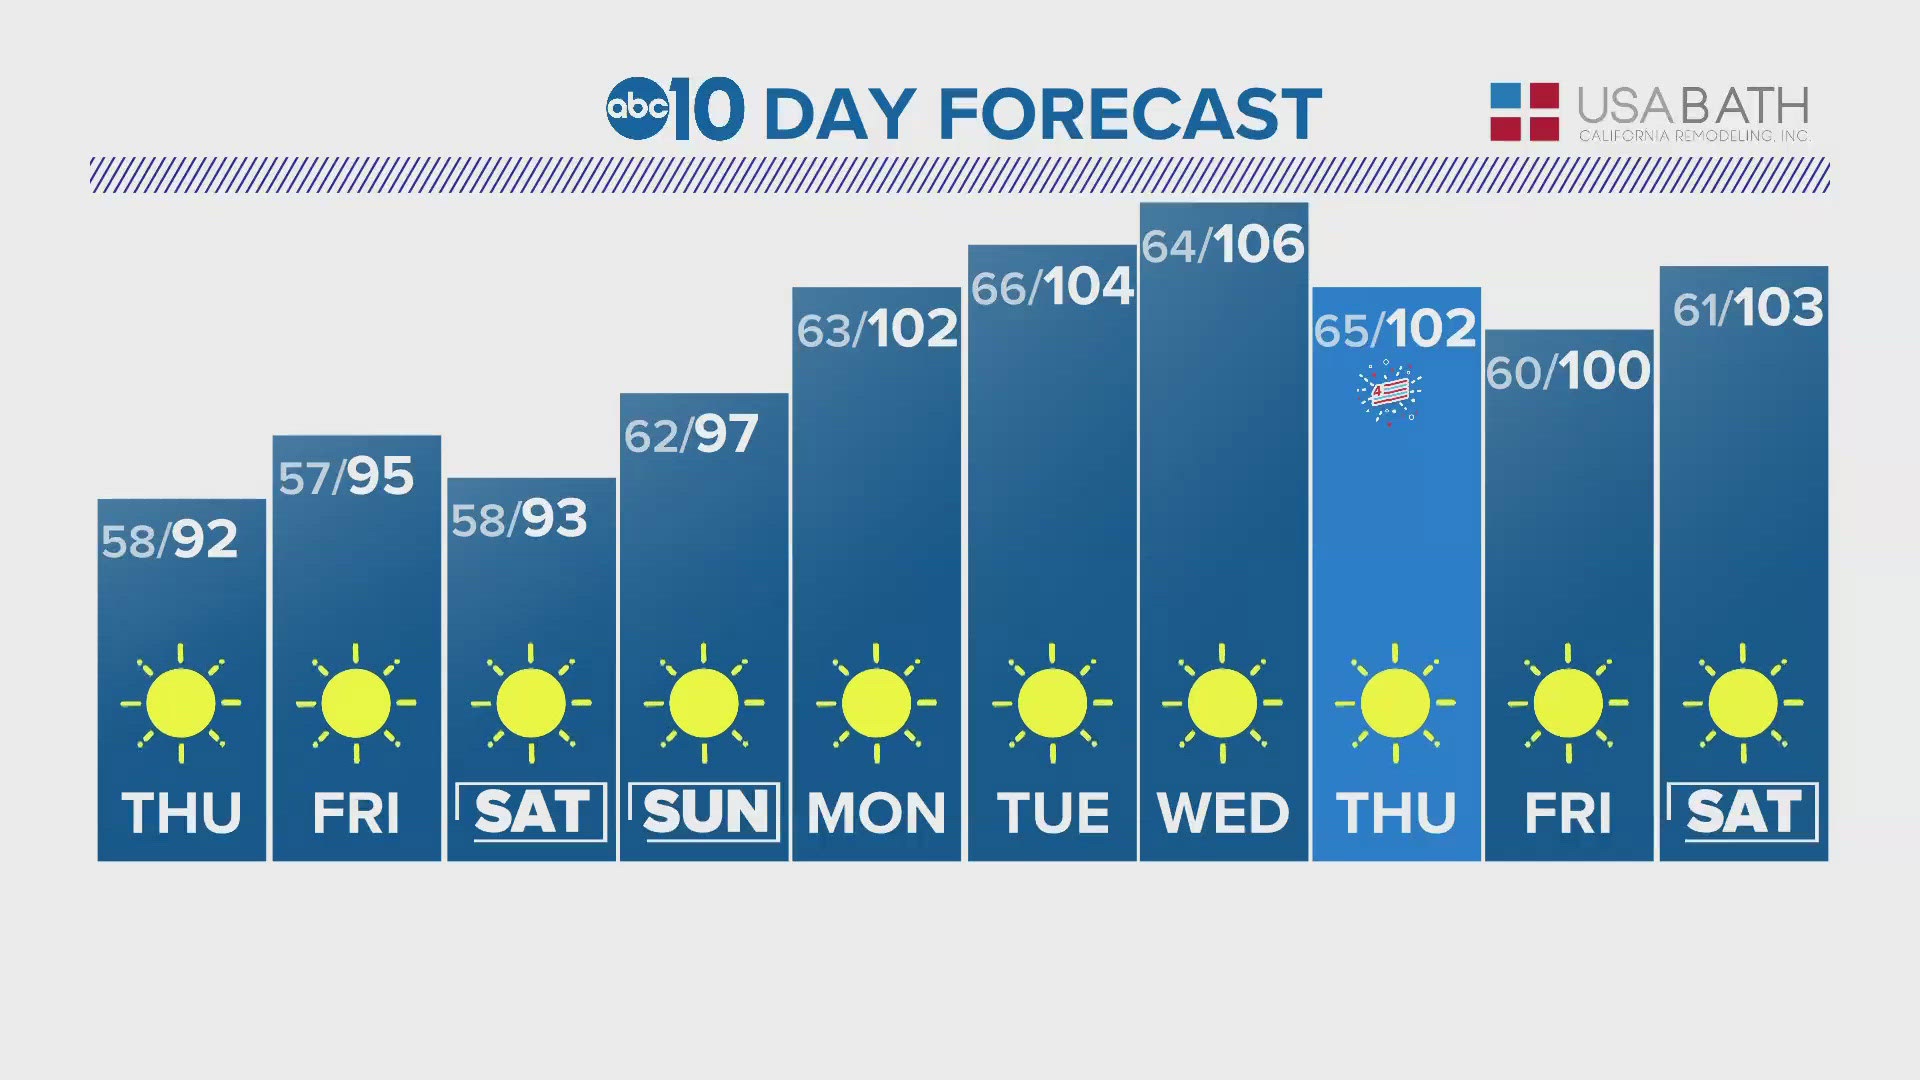 ABC10 Meteorologist Brenden Mincheff tells us what to expect for the next 10 days of weather.